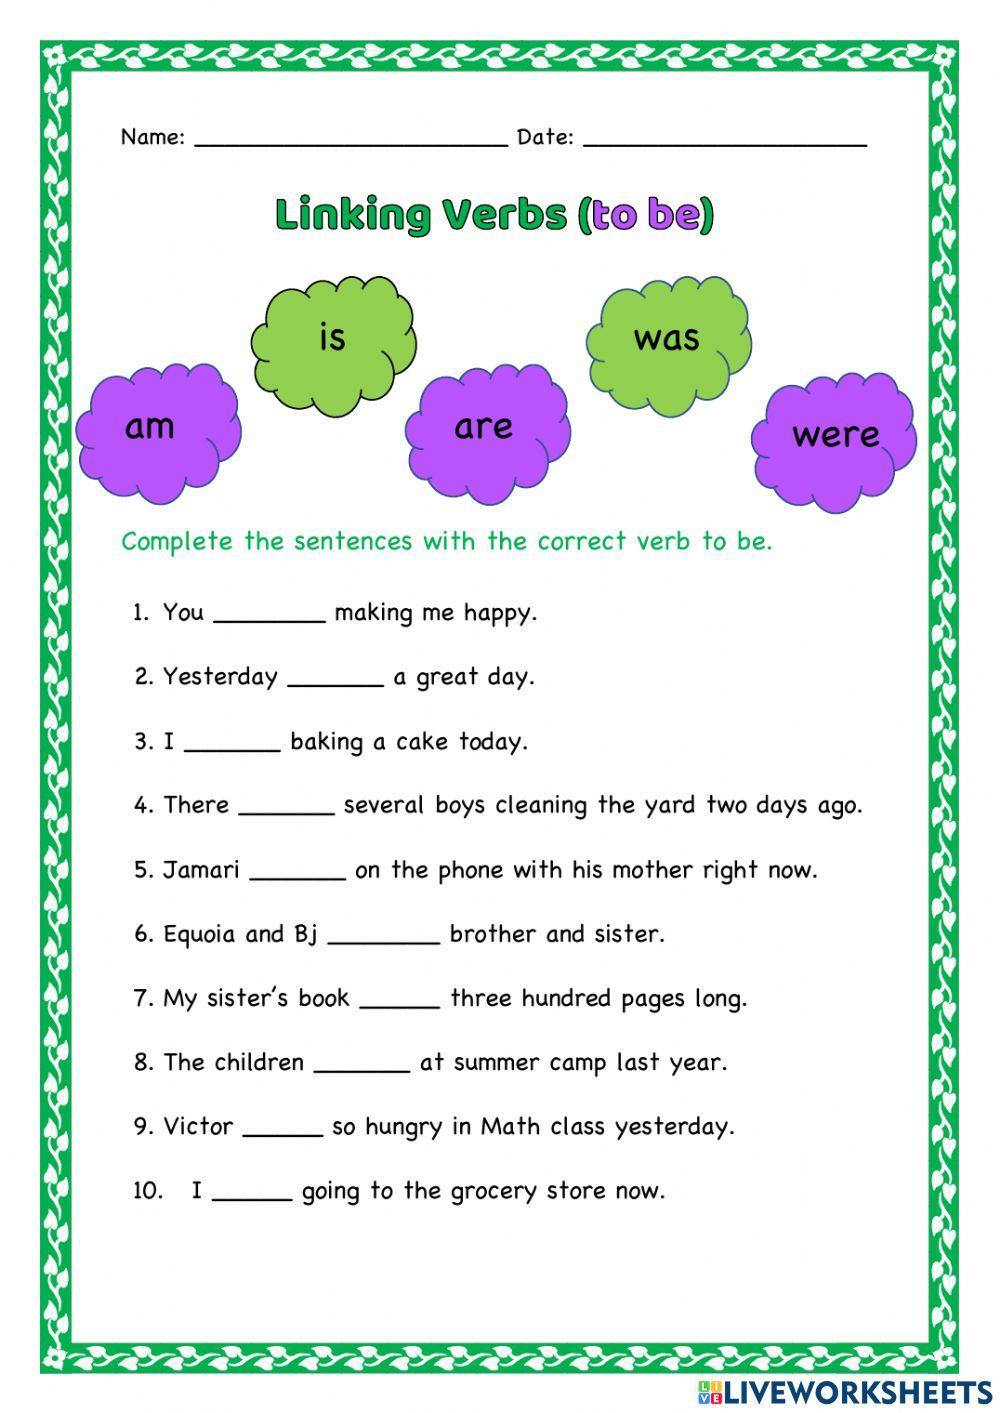 Linking Verbs (to be)